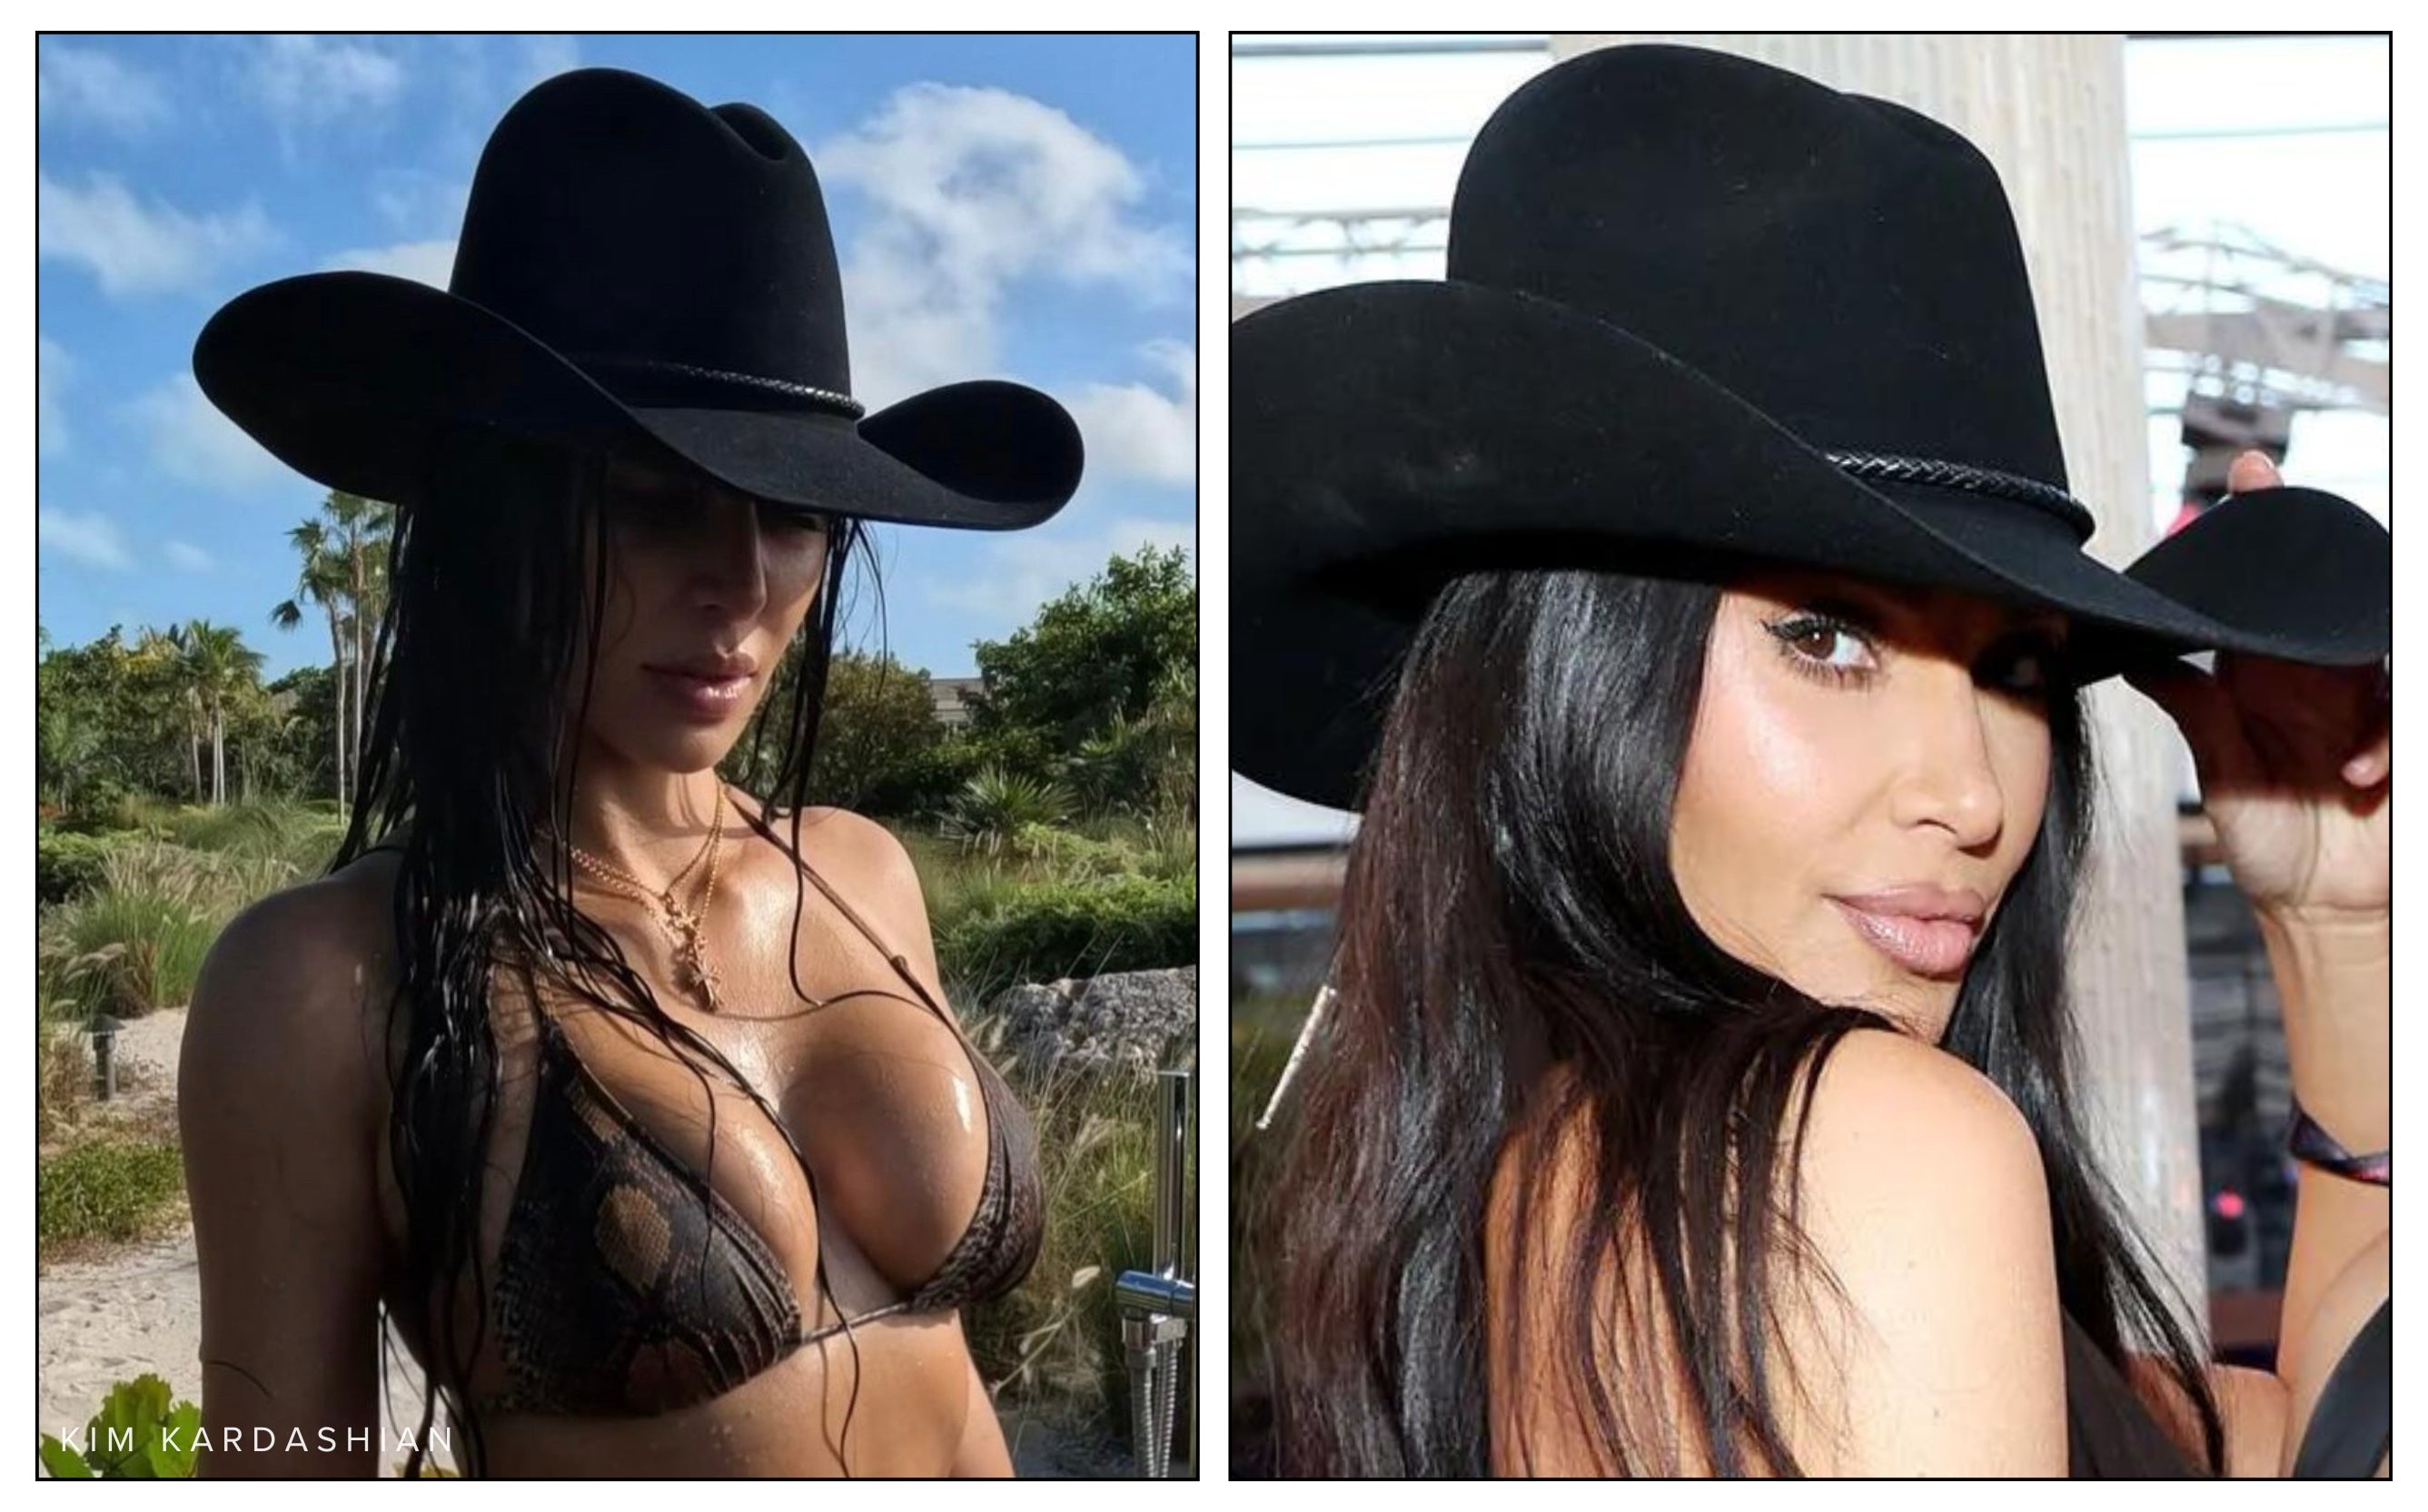 Kim Kardashian shown on two occasions wearing a black cowgirl hat in a bikini and with another celebrity